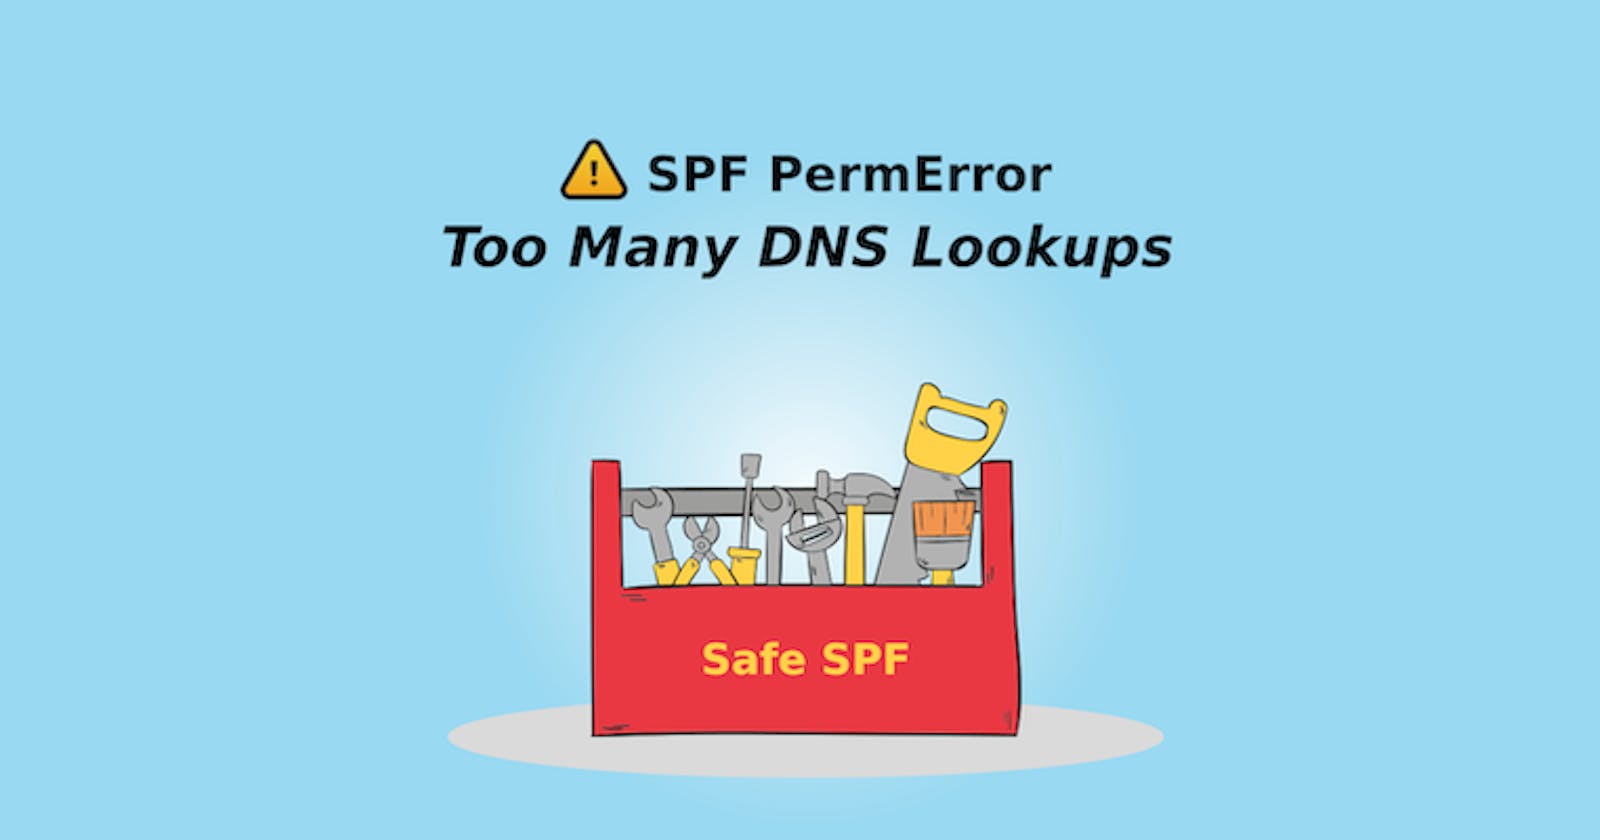 How to fix SPF PermError: too many DNS lookups